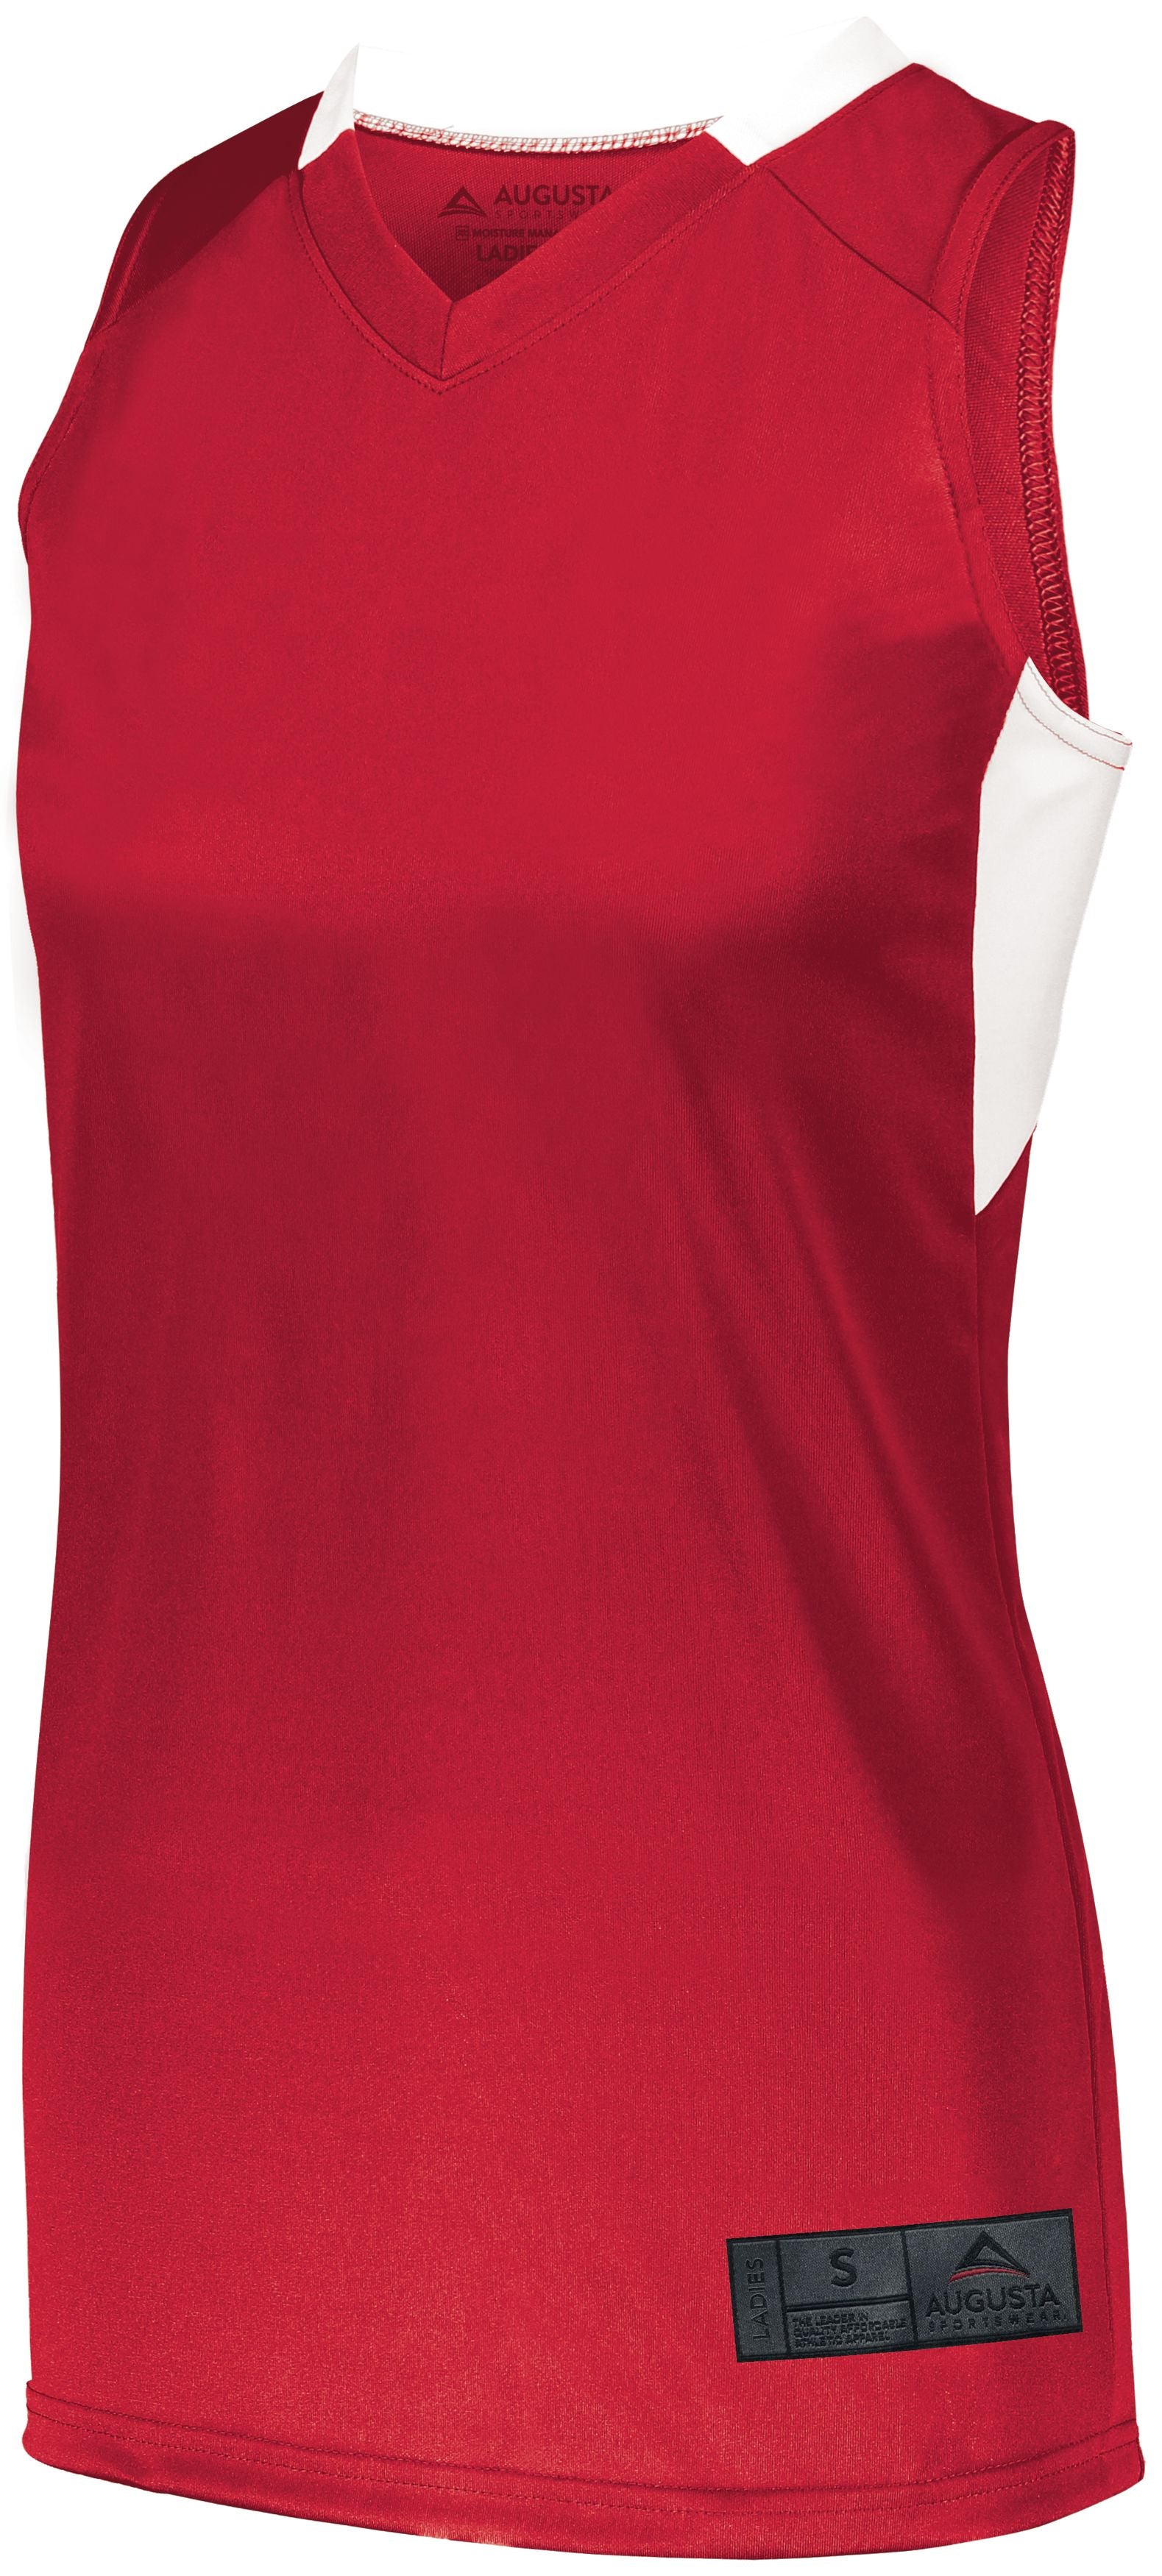 Augusta Sportswear Ladies Step-Back Basketball Jersey in Red/White  -Part of the Ladies, Ladies-Jersey, Augusta-Products, Basketball, Shirts, All-Sports, All-Sports-1 product lines at KanaleyCreations.com